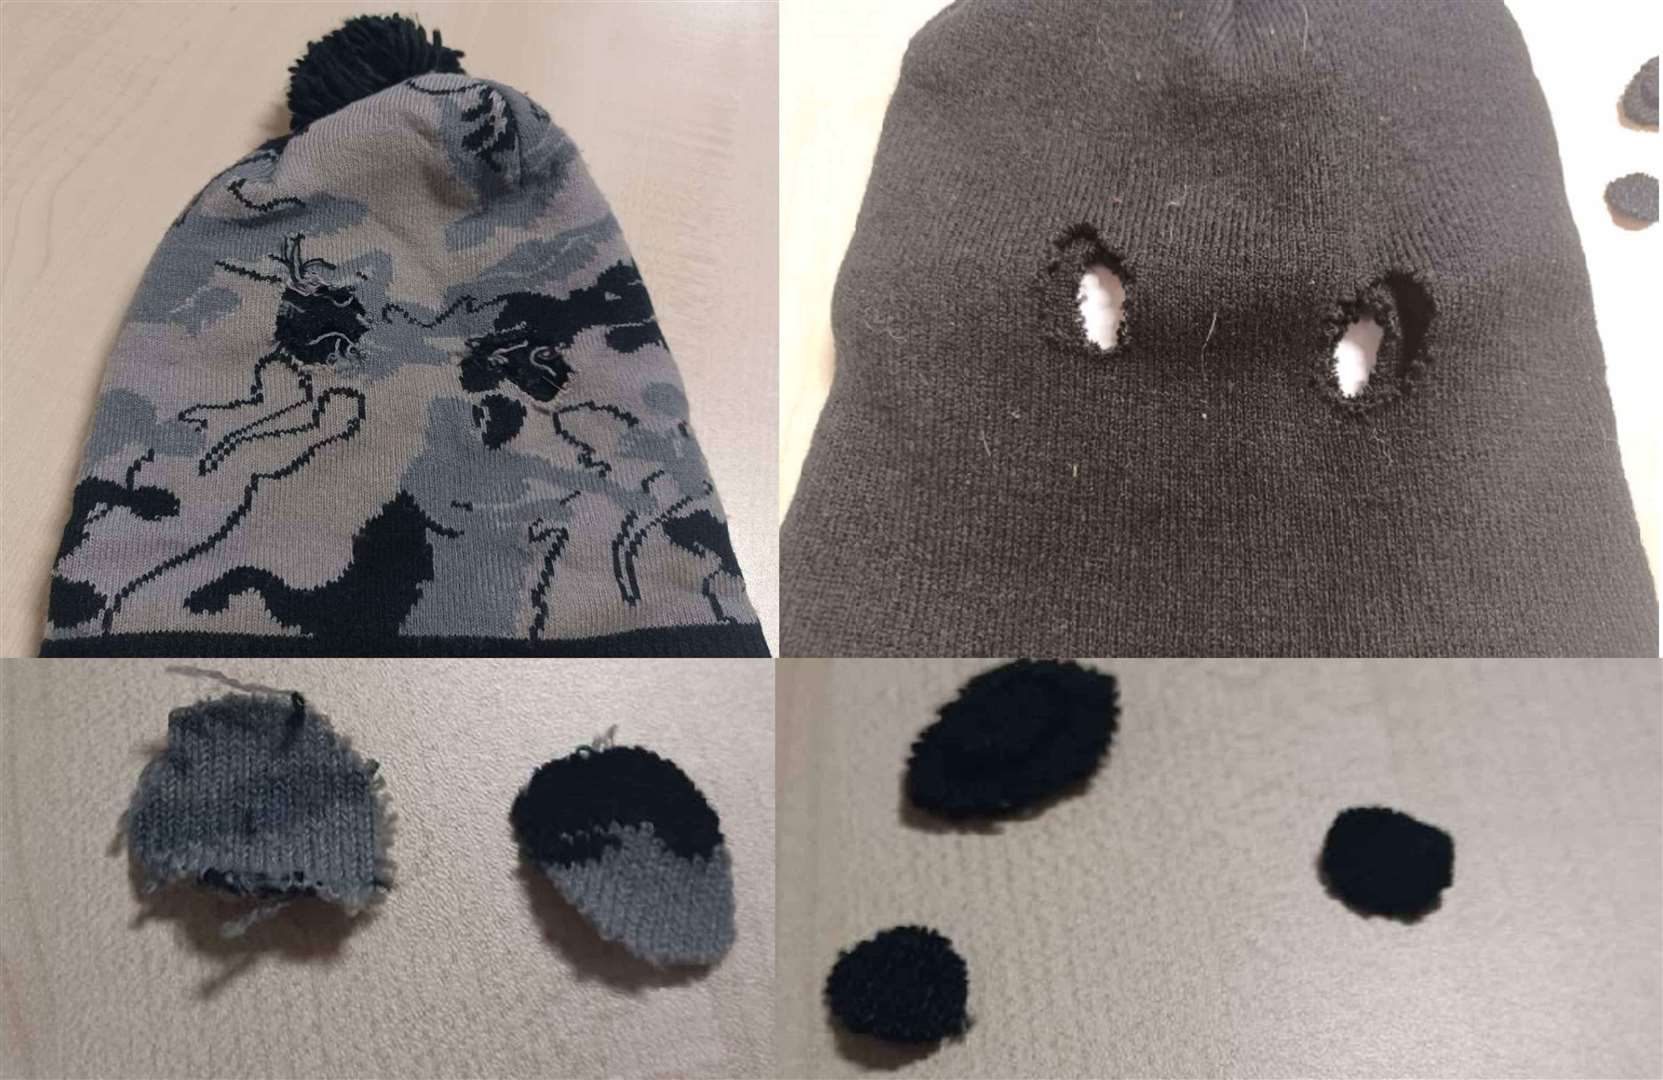 The homemade balaclavas and fabric were found by officers. Picture: Warwickshire Police